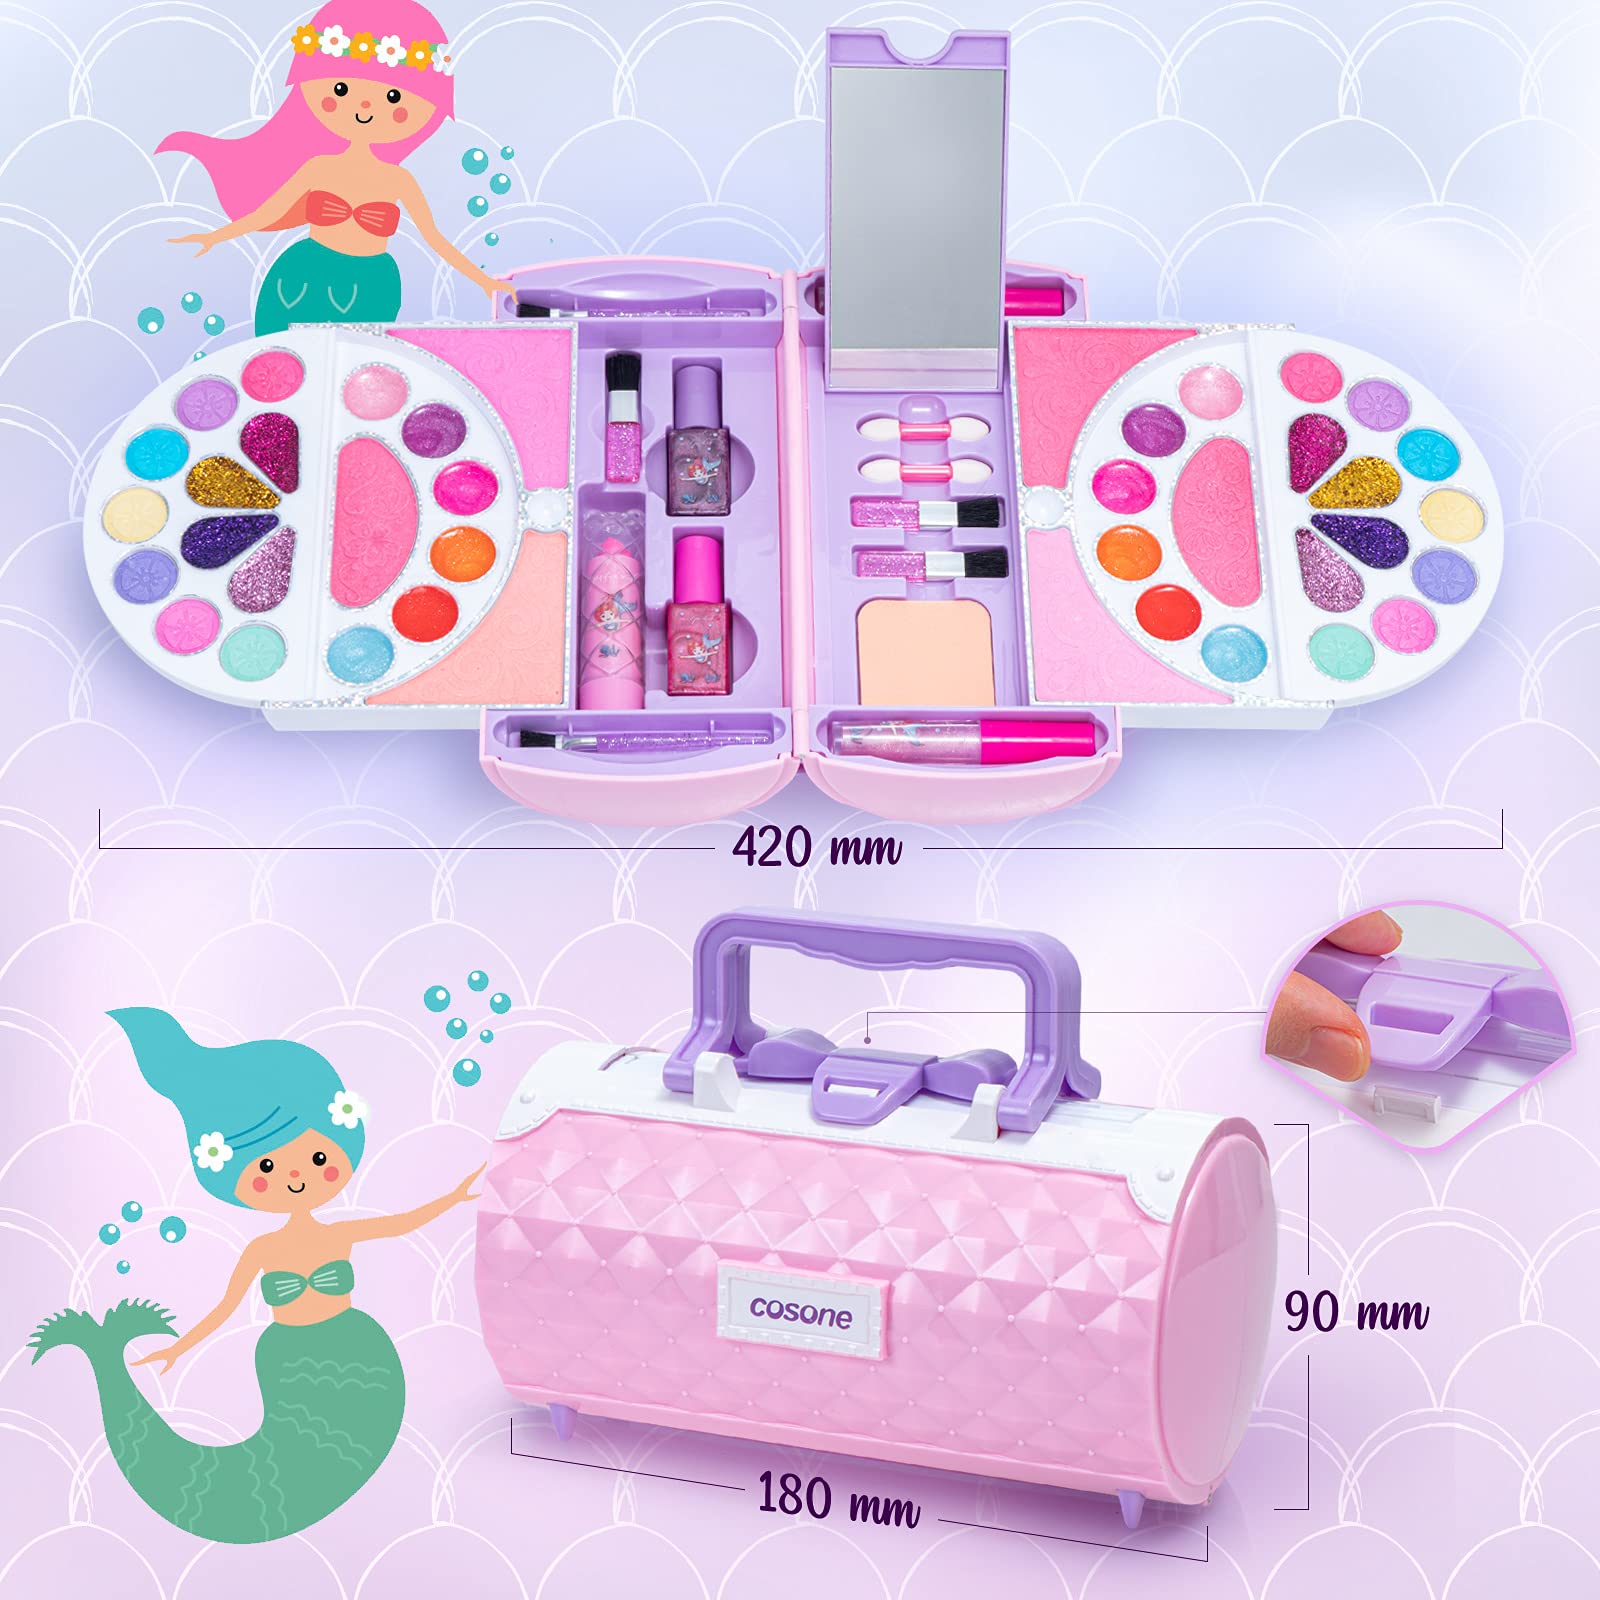 cosone Kids Makeup Kit 54 Pcs Real Cosmetic Make Up Set, Safty Tested Washable Makeup Toy Set with Portable Box for Girls Prentent Play Christmas Birthday Gift Toys